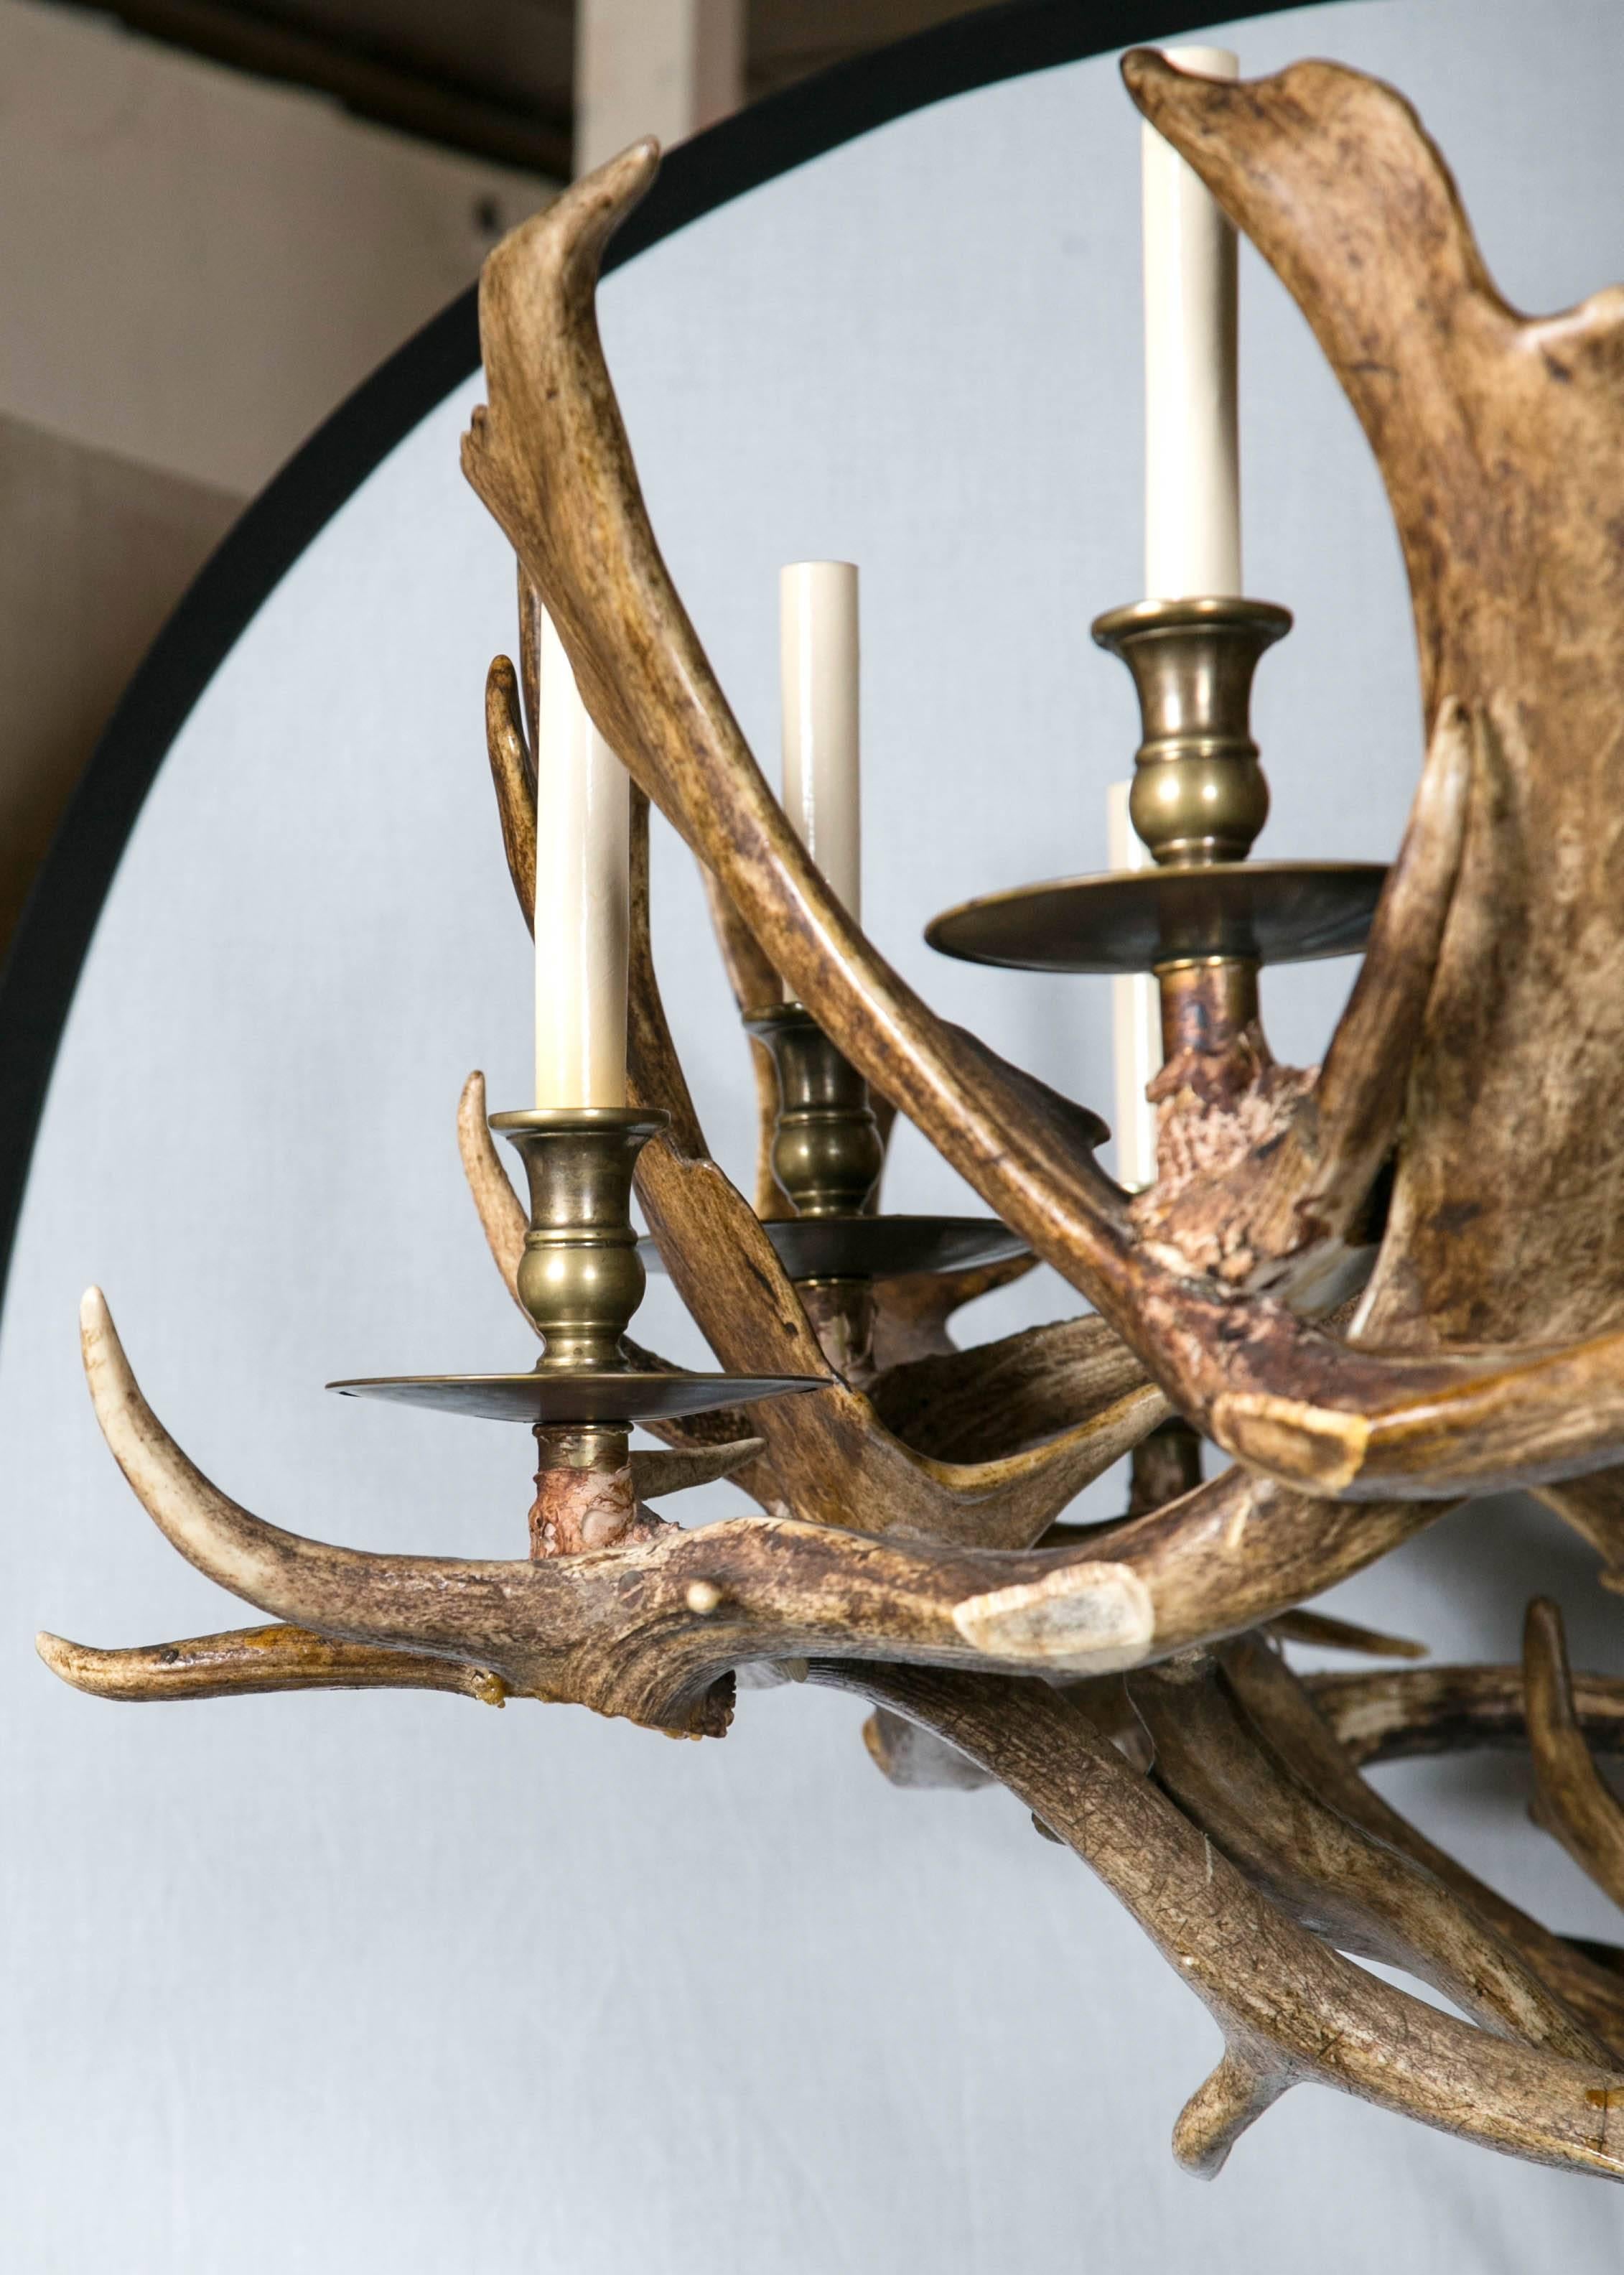 Natural caribou antlers have been formed into a unique twelve-light chandelier with brass candle cups and drip pans. The antlers have been varnished. At the top is a brass stem and ring. In the center inside, at the top is an acorn finial.
The